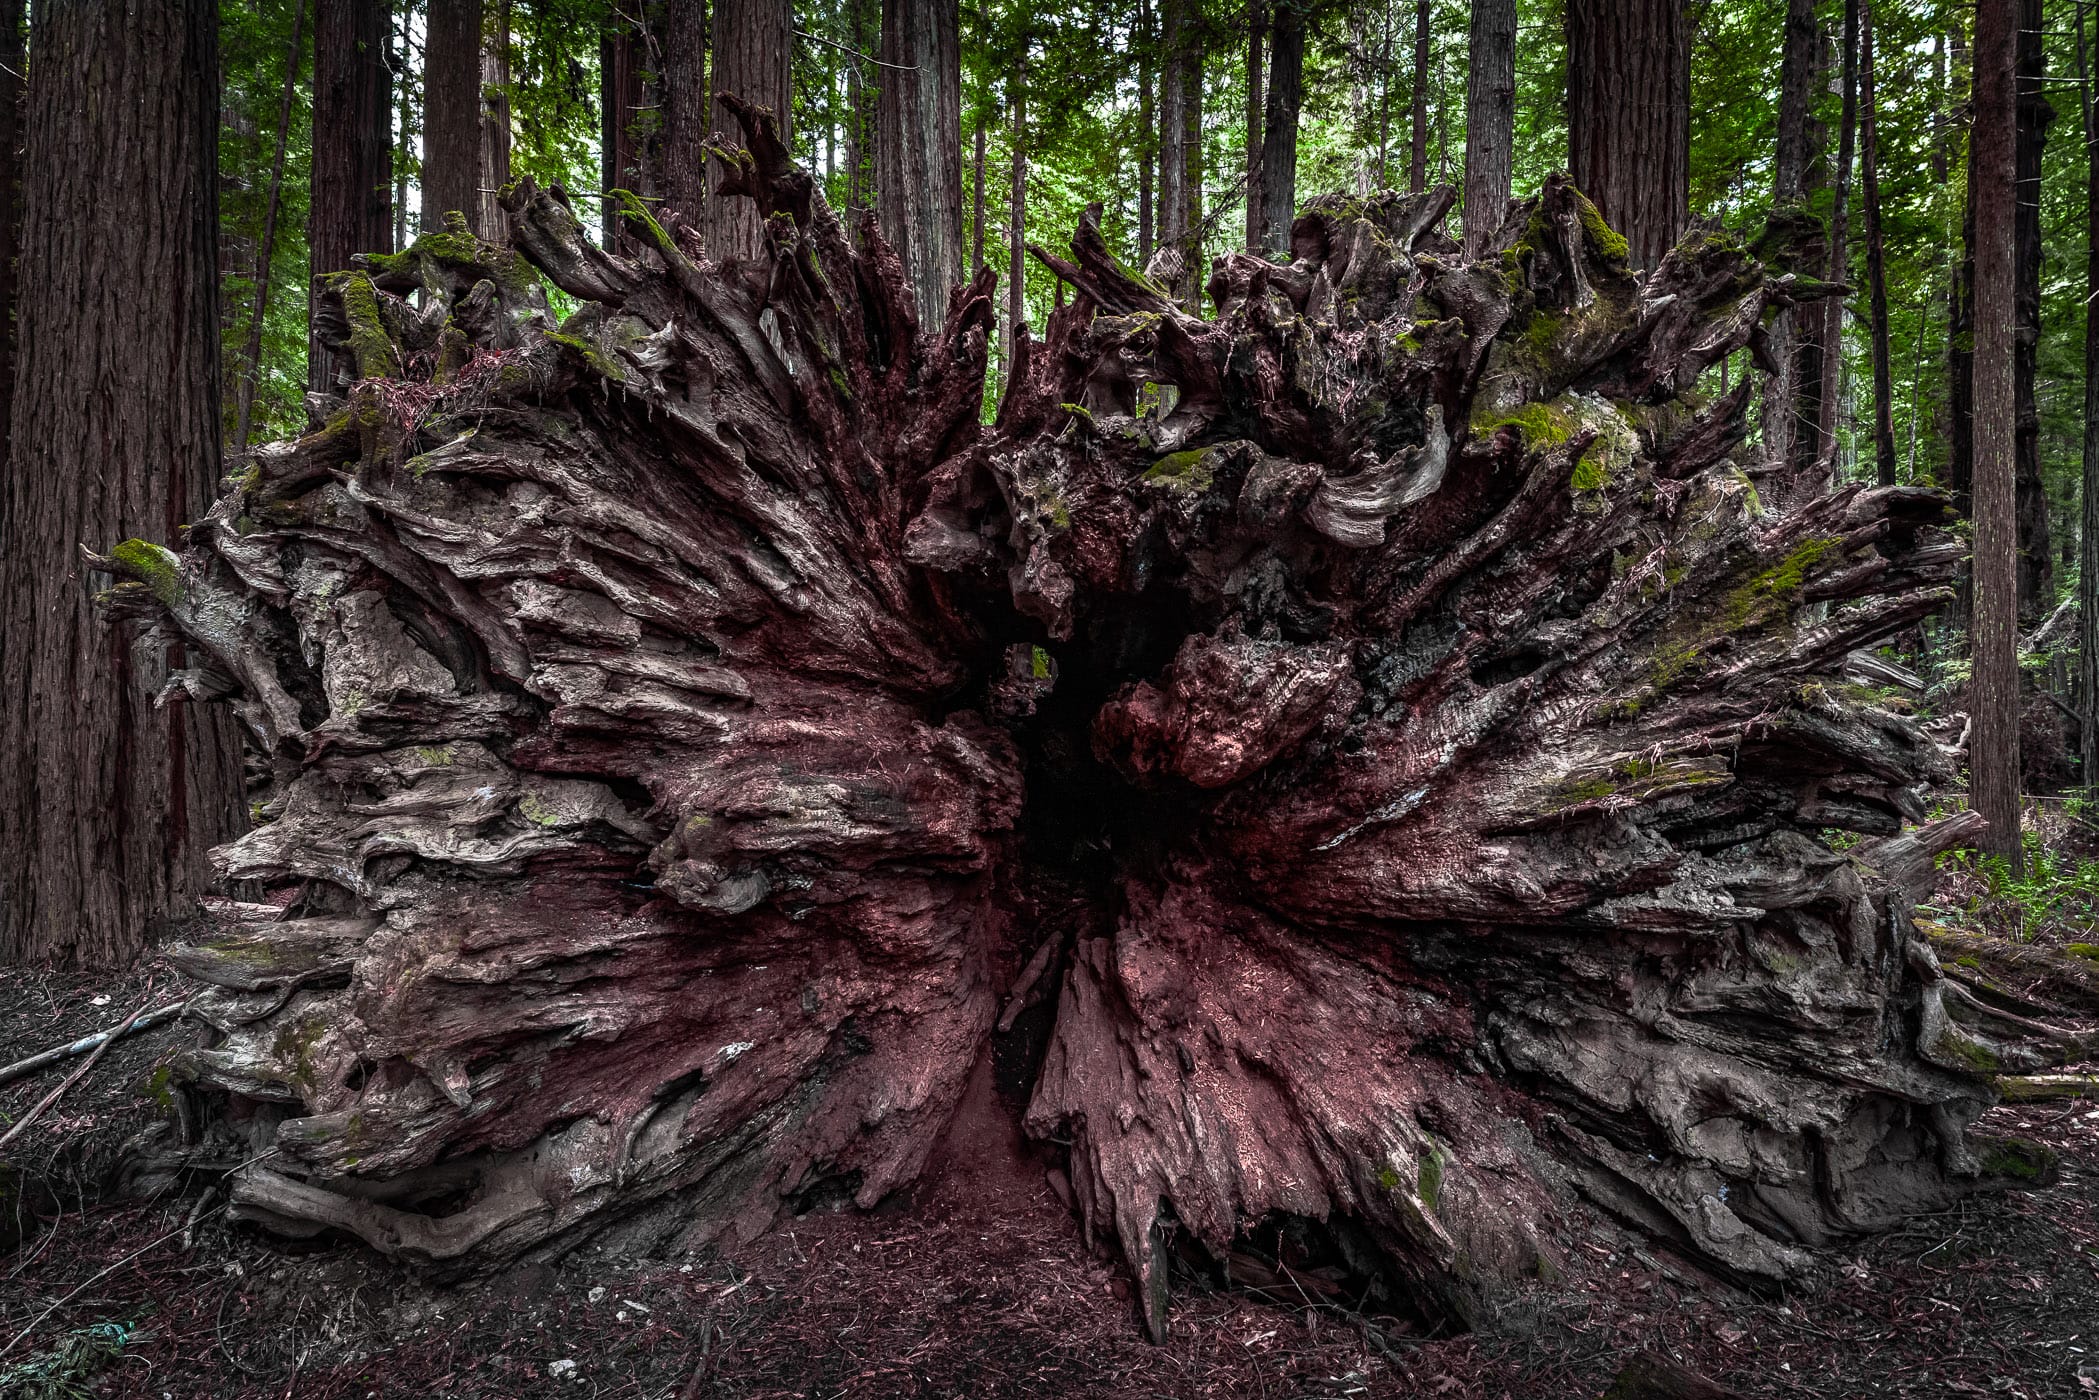 The base of a fallen Coast Redwood found in California's Humboldt Redwoods State Park.